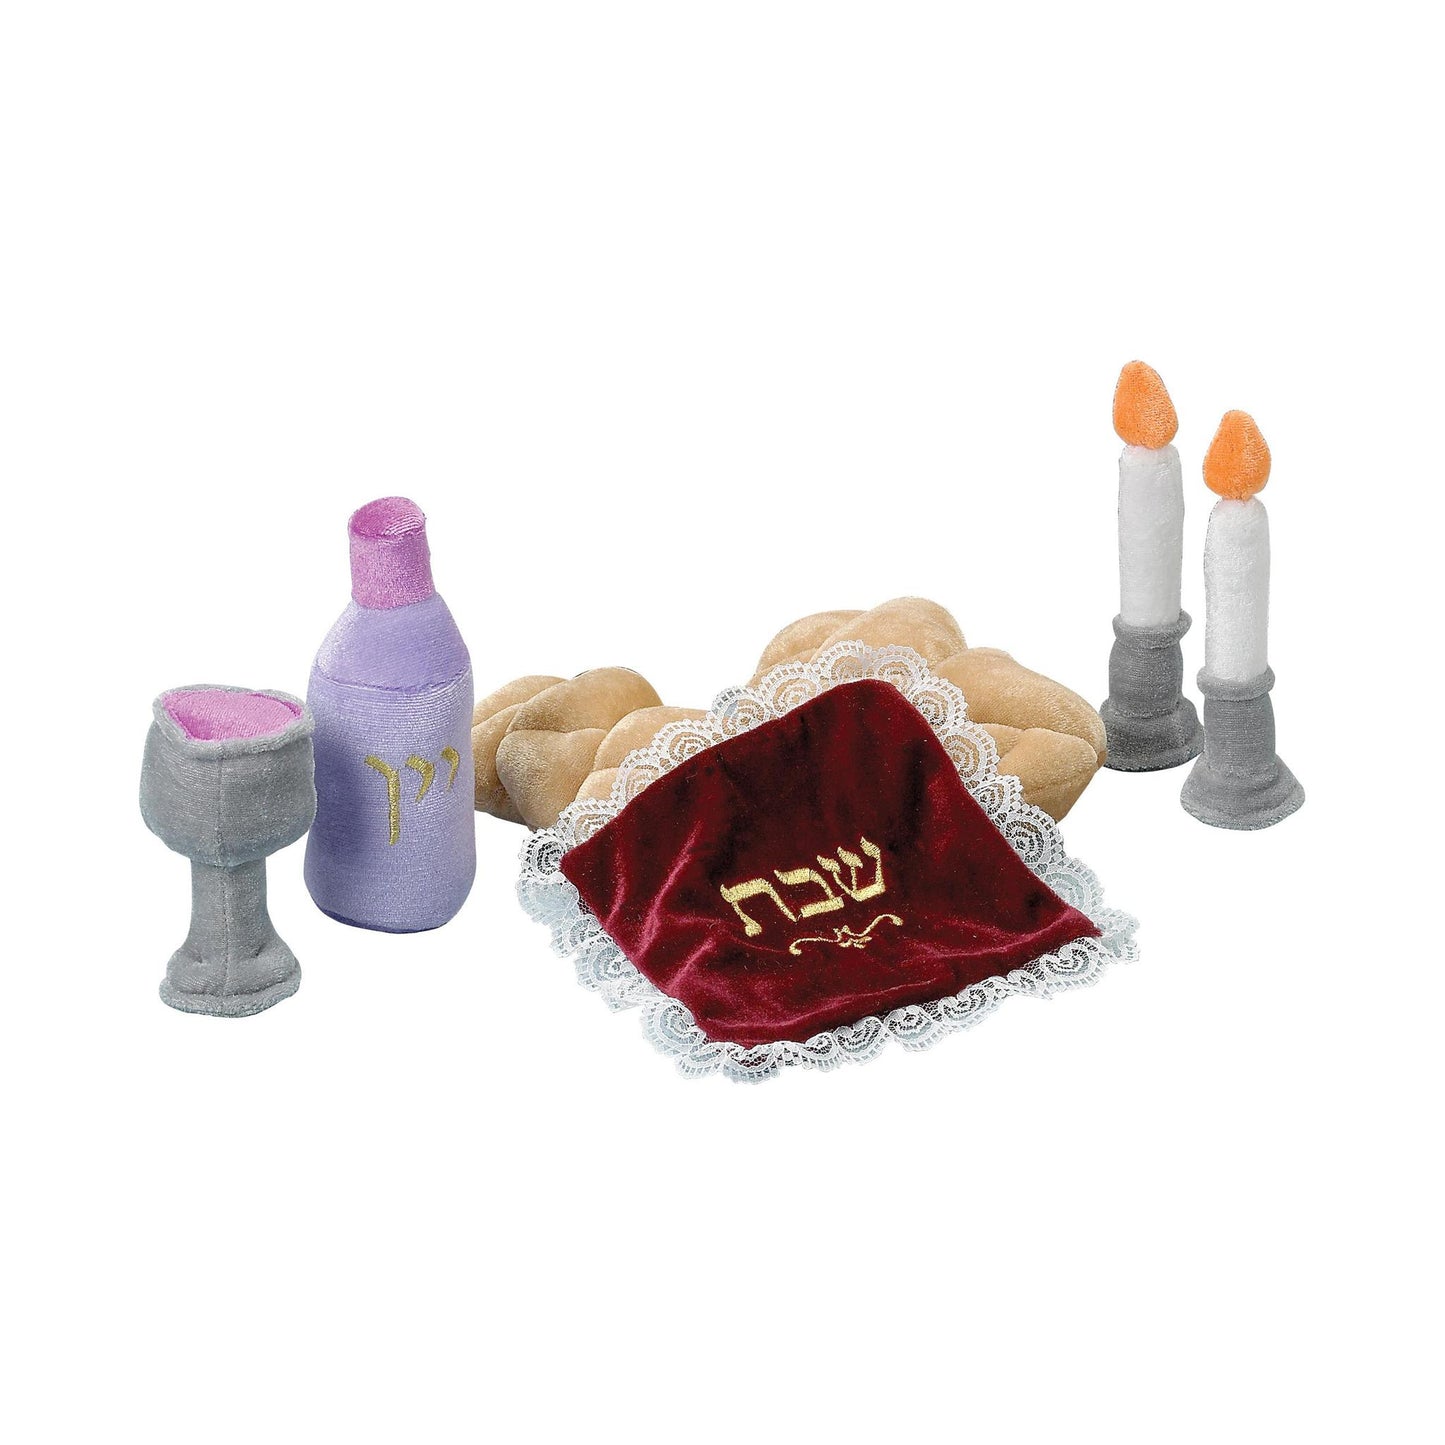 My Soft Shabbat Set Plush Toys - Includes 2 candlesticks, 1 wine bottle, 1 Kiddush cup, 2 Challahs, and 1 Challah cover